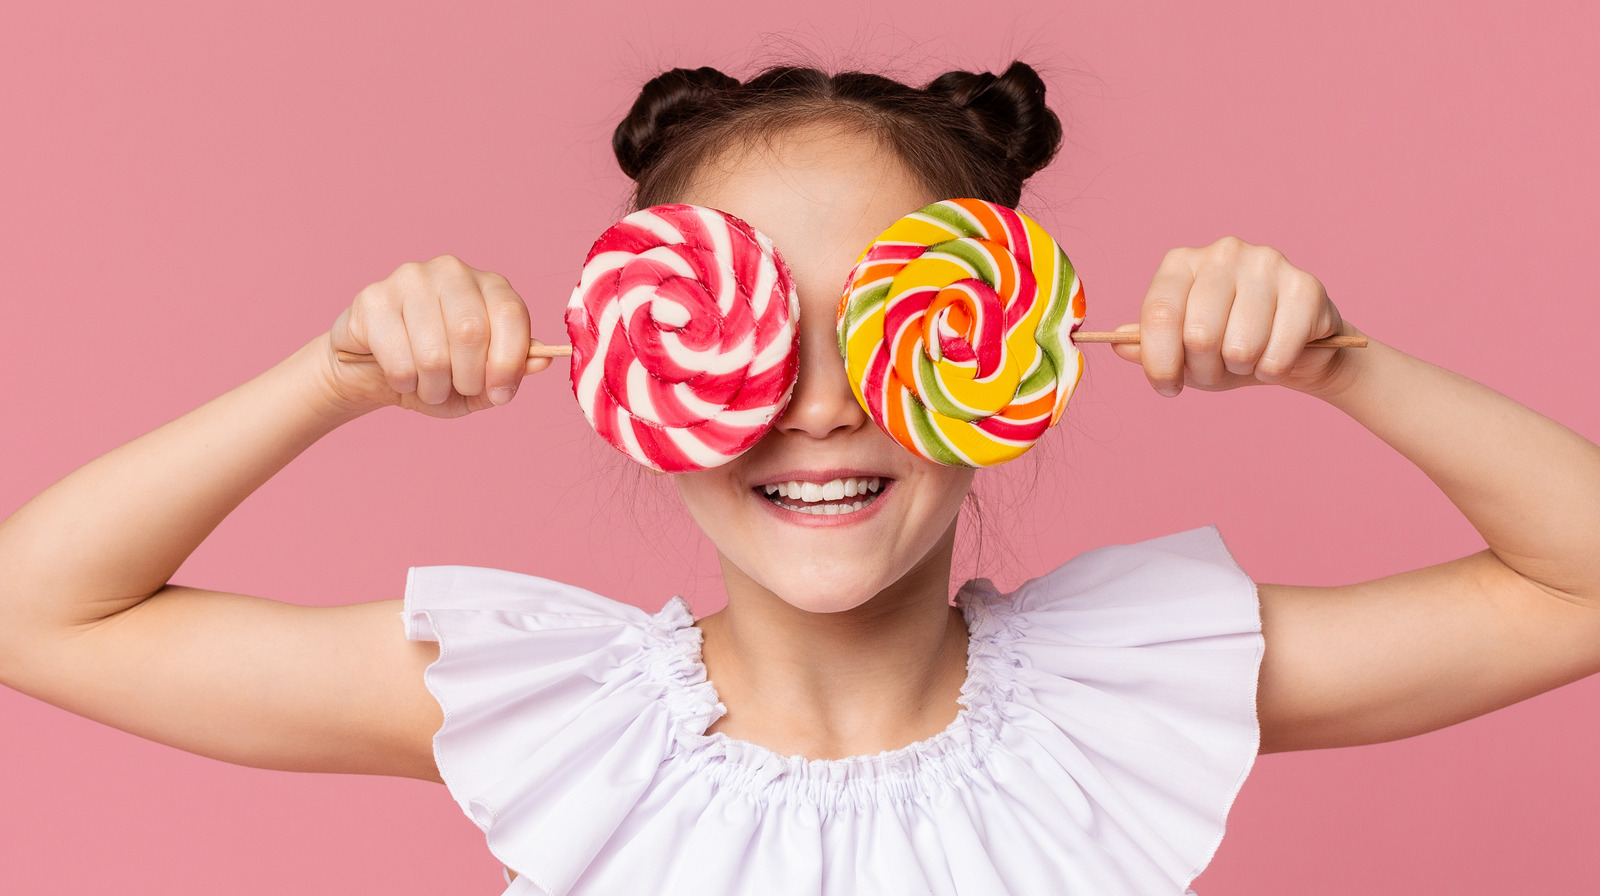 The History Of Lollipop